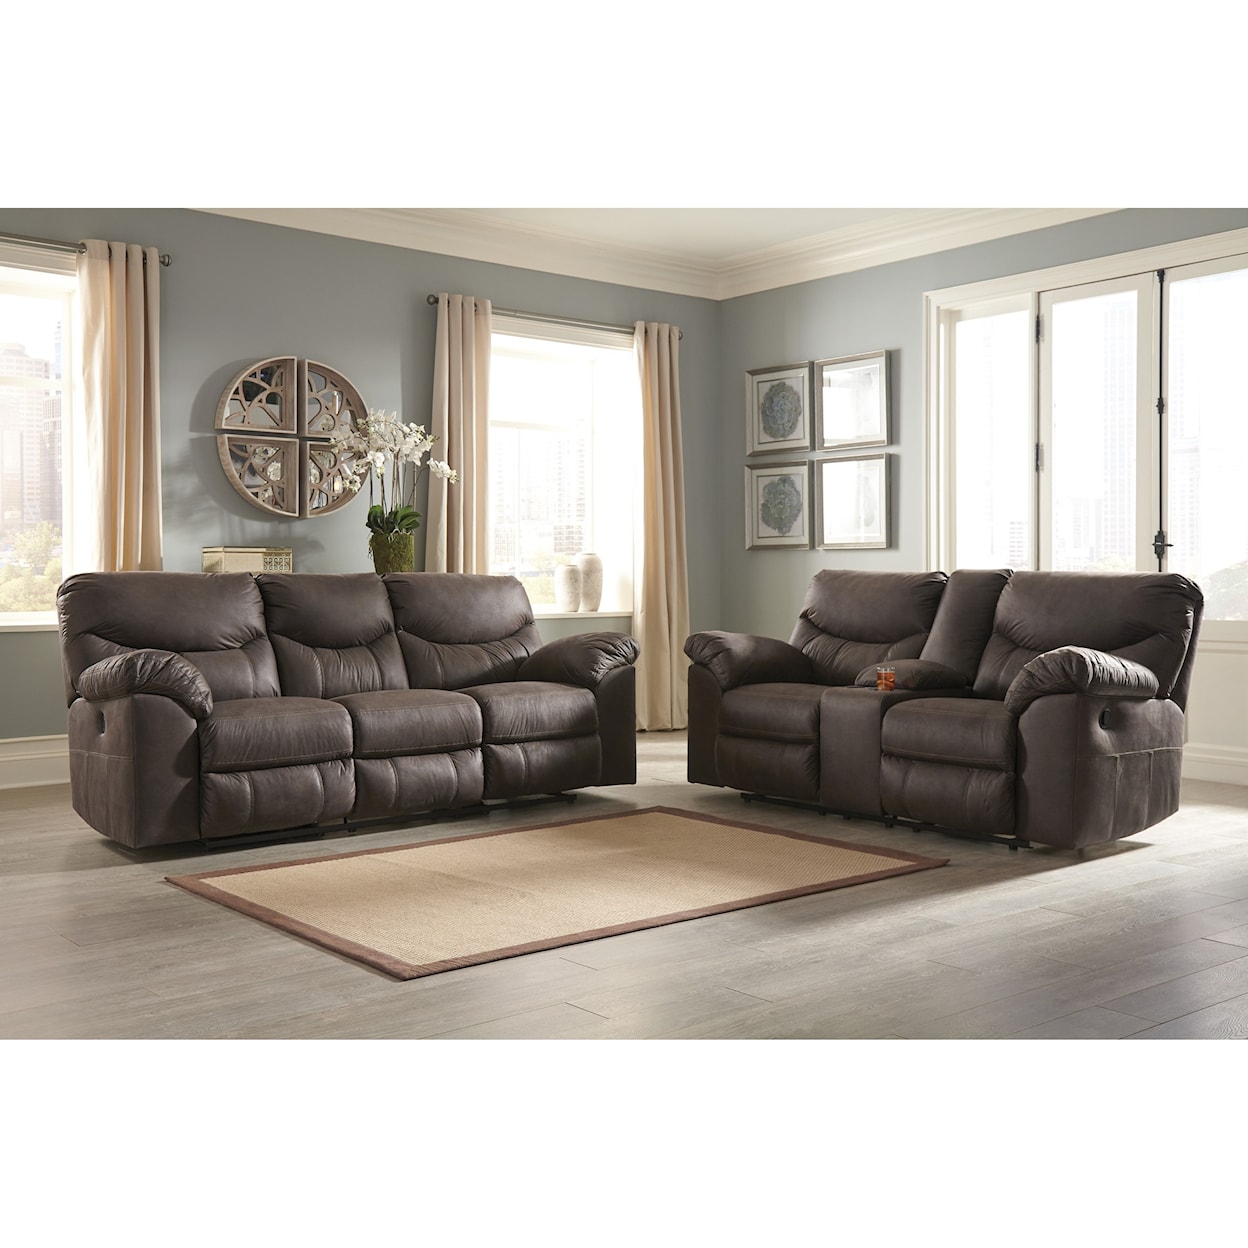 Signature Design by Ashley Boxberg Reclining Living Room Group